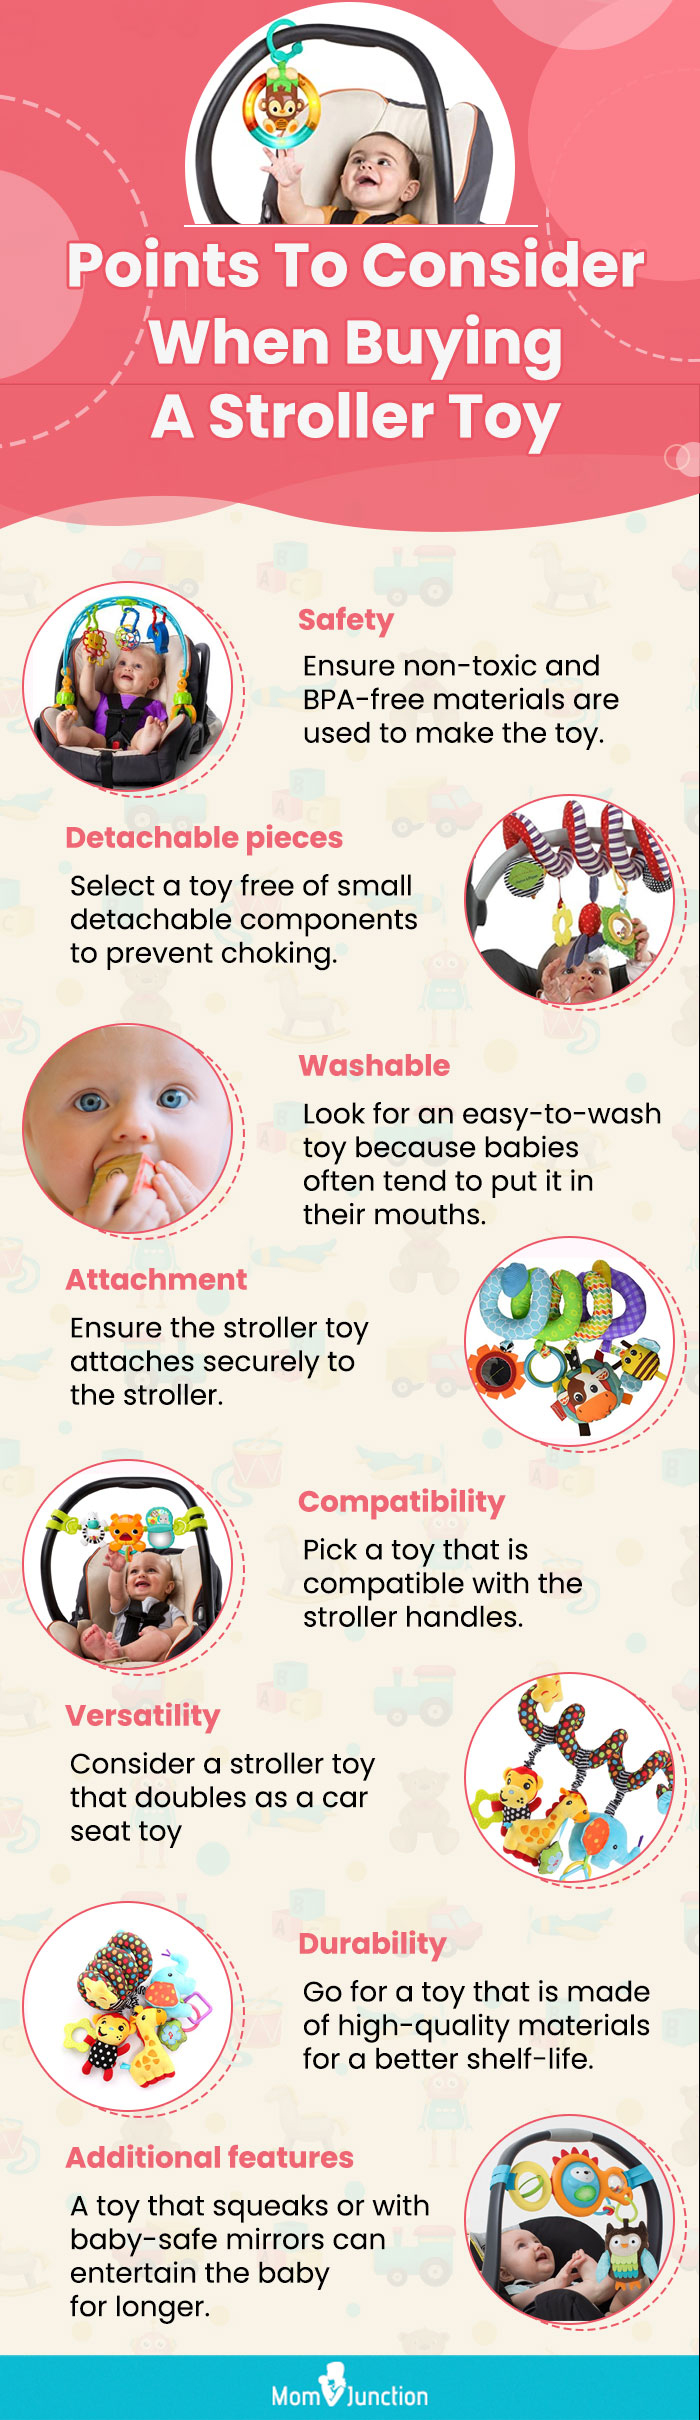 Points To Consider When Buying A stroller Toy (infographic)